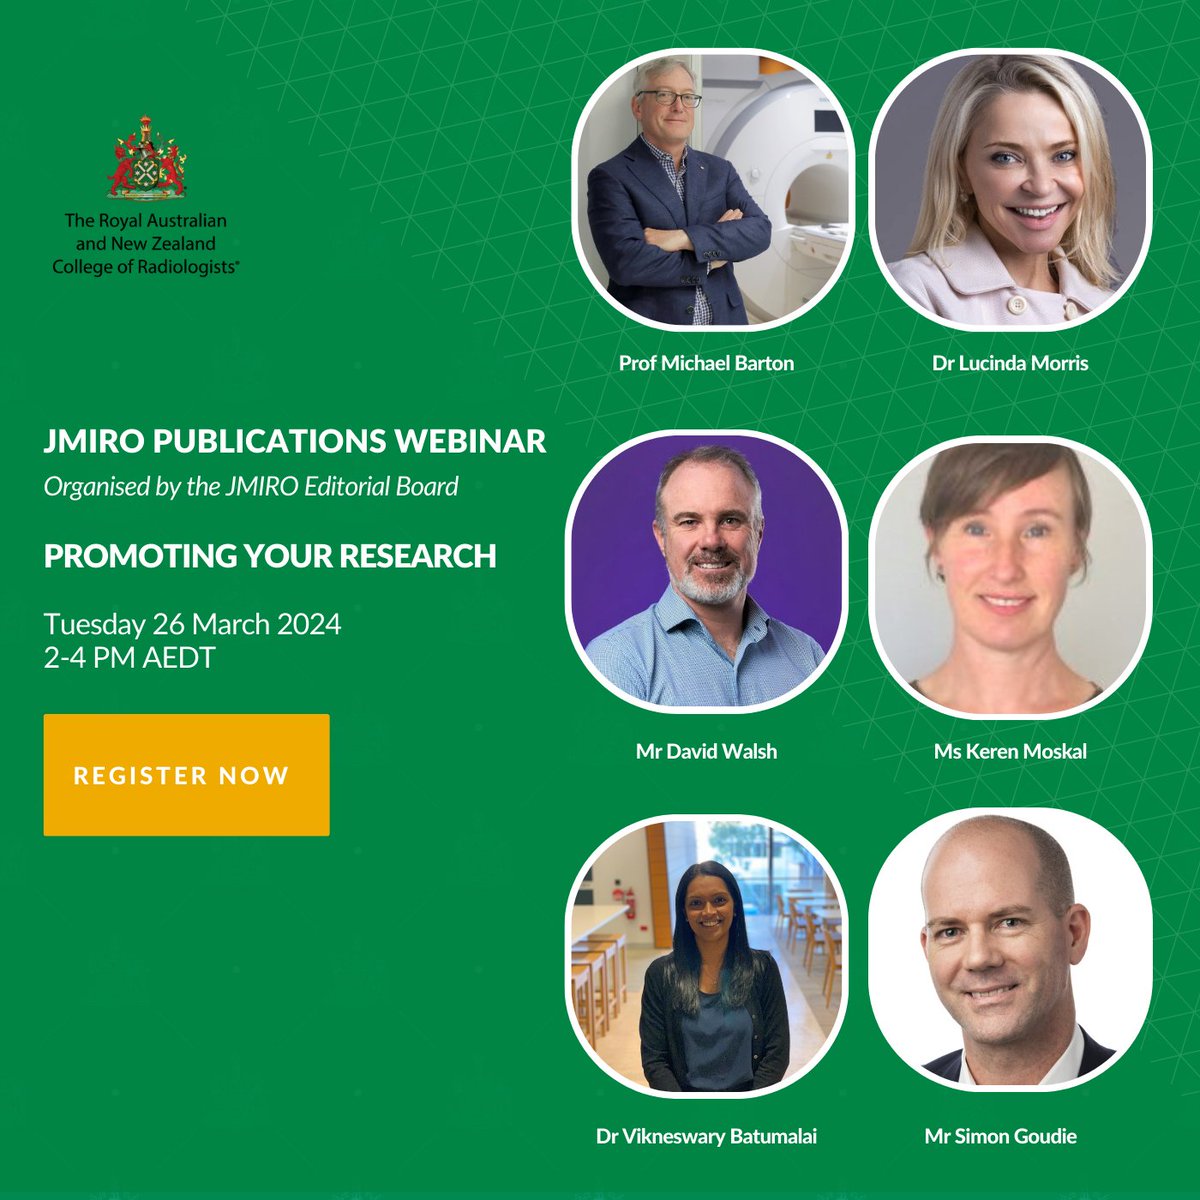 Discover ways you can promote your research & build your reputation. Experts will discuss bibliometrics, social media, open access, promotion of your publications & more to communicate your research to a wider audience & increase public engagement. 

ow.ly/Xvzj50Qztn5